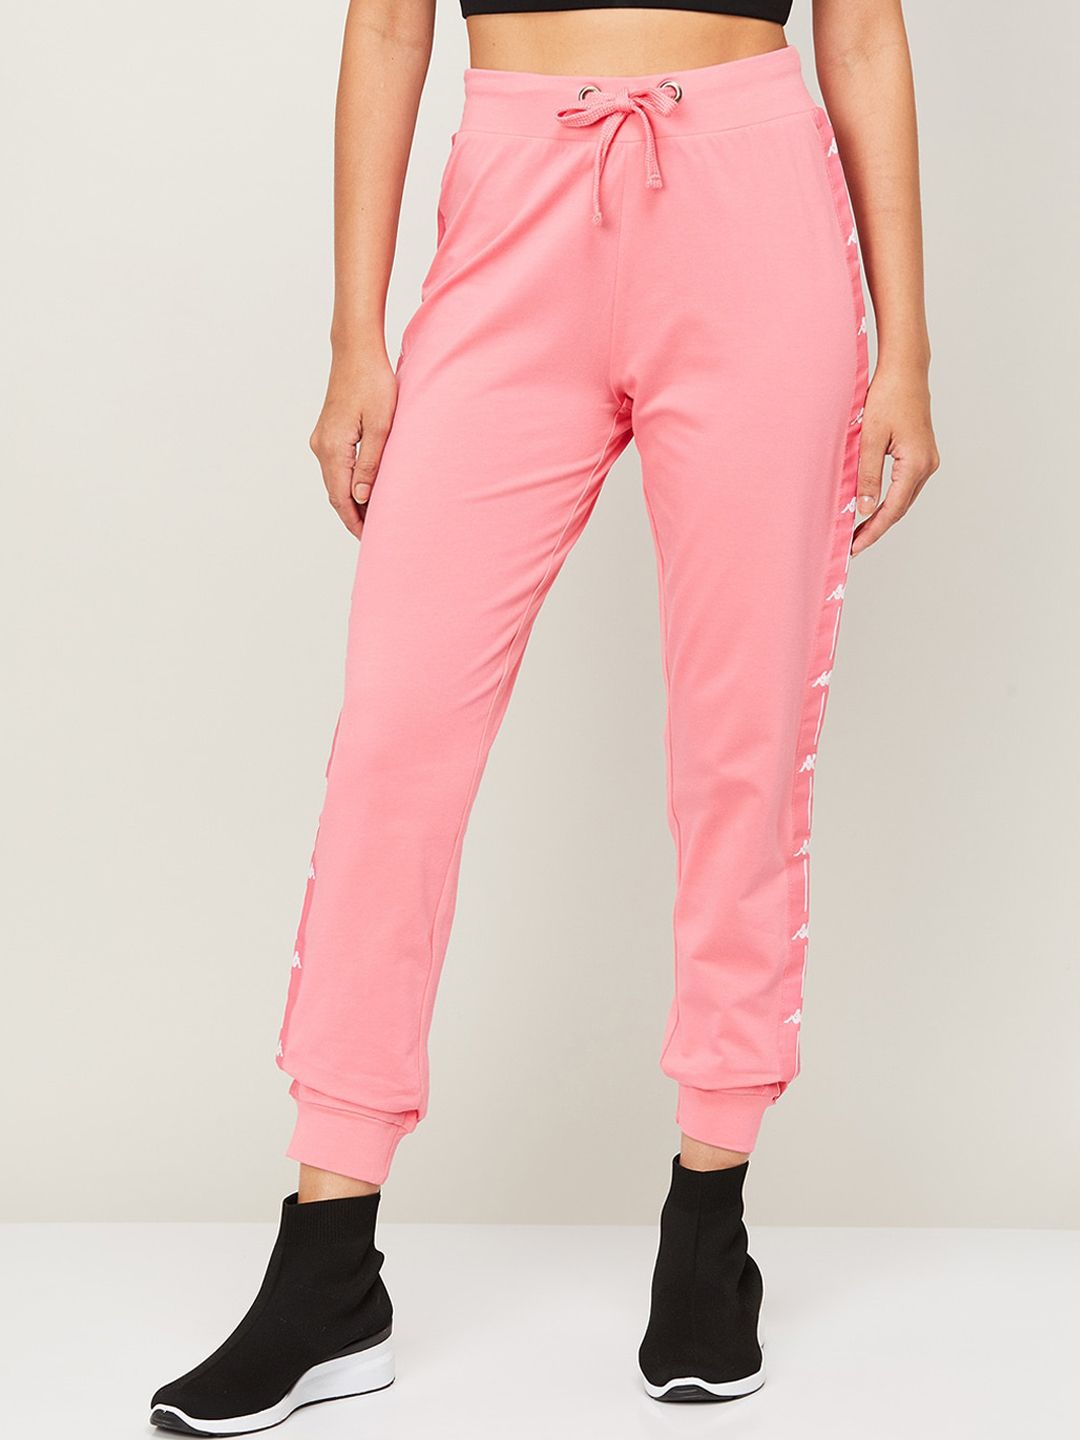 Kappa Women Pink Solid Cotton Joggers Price in India